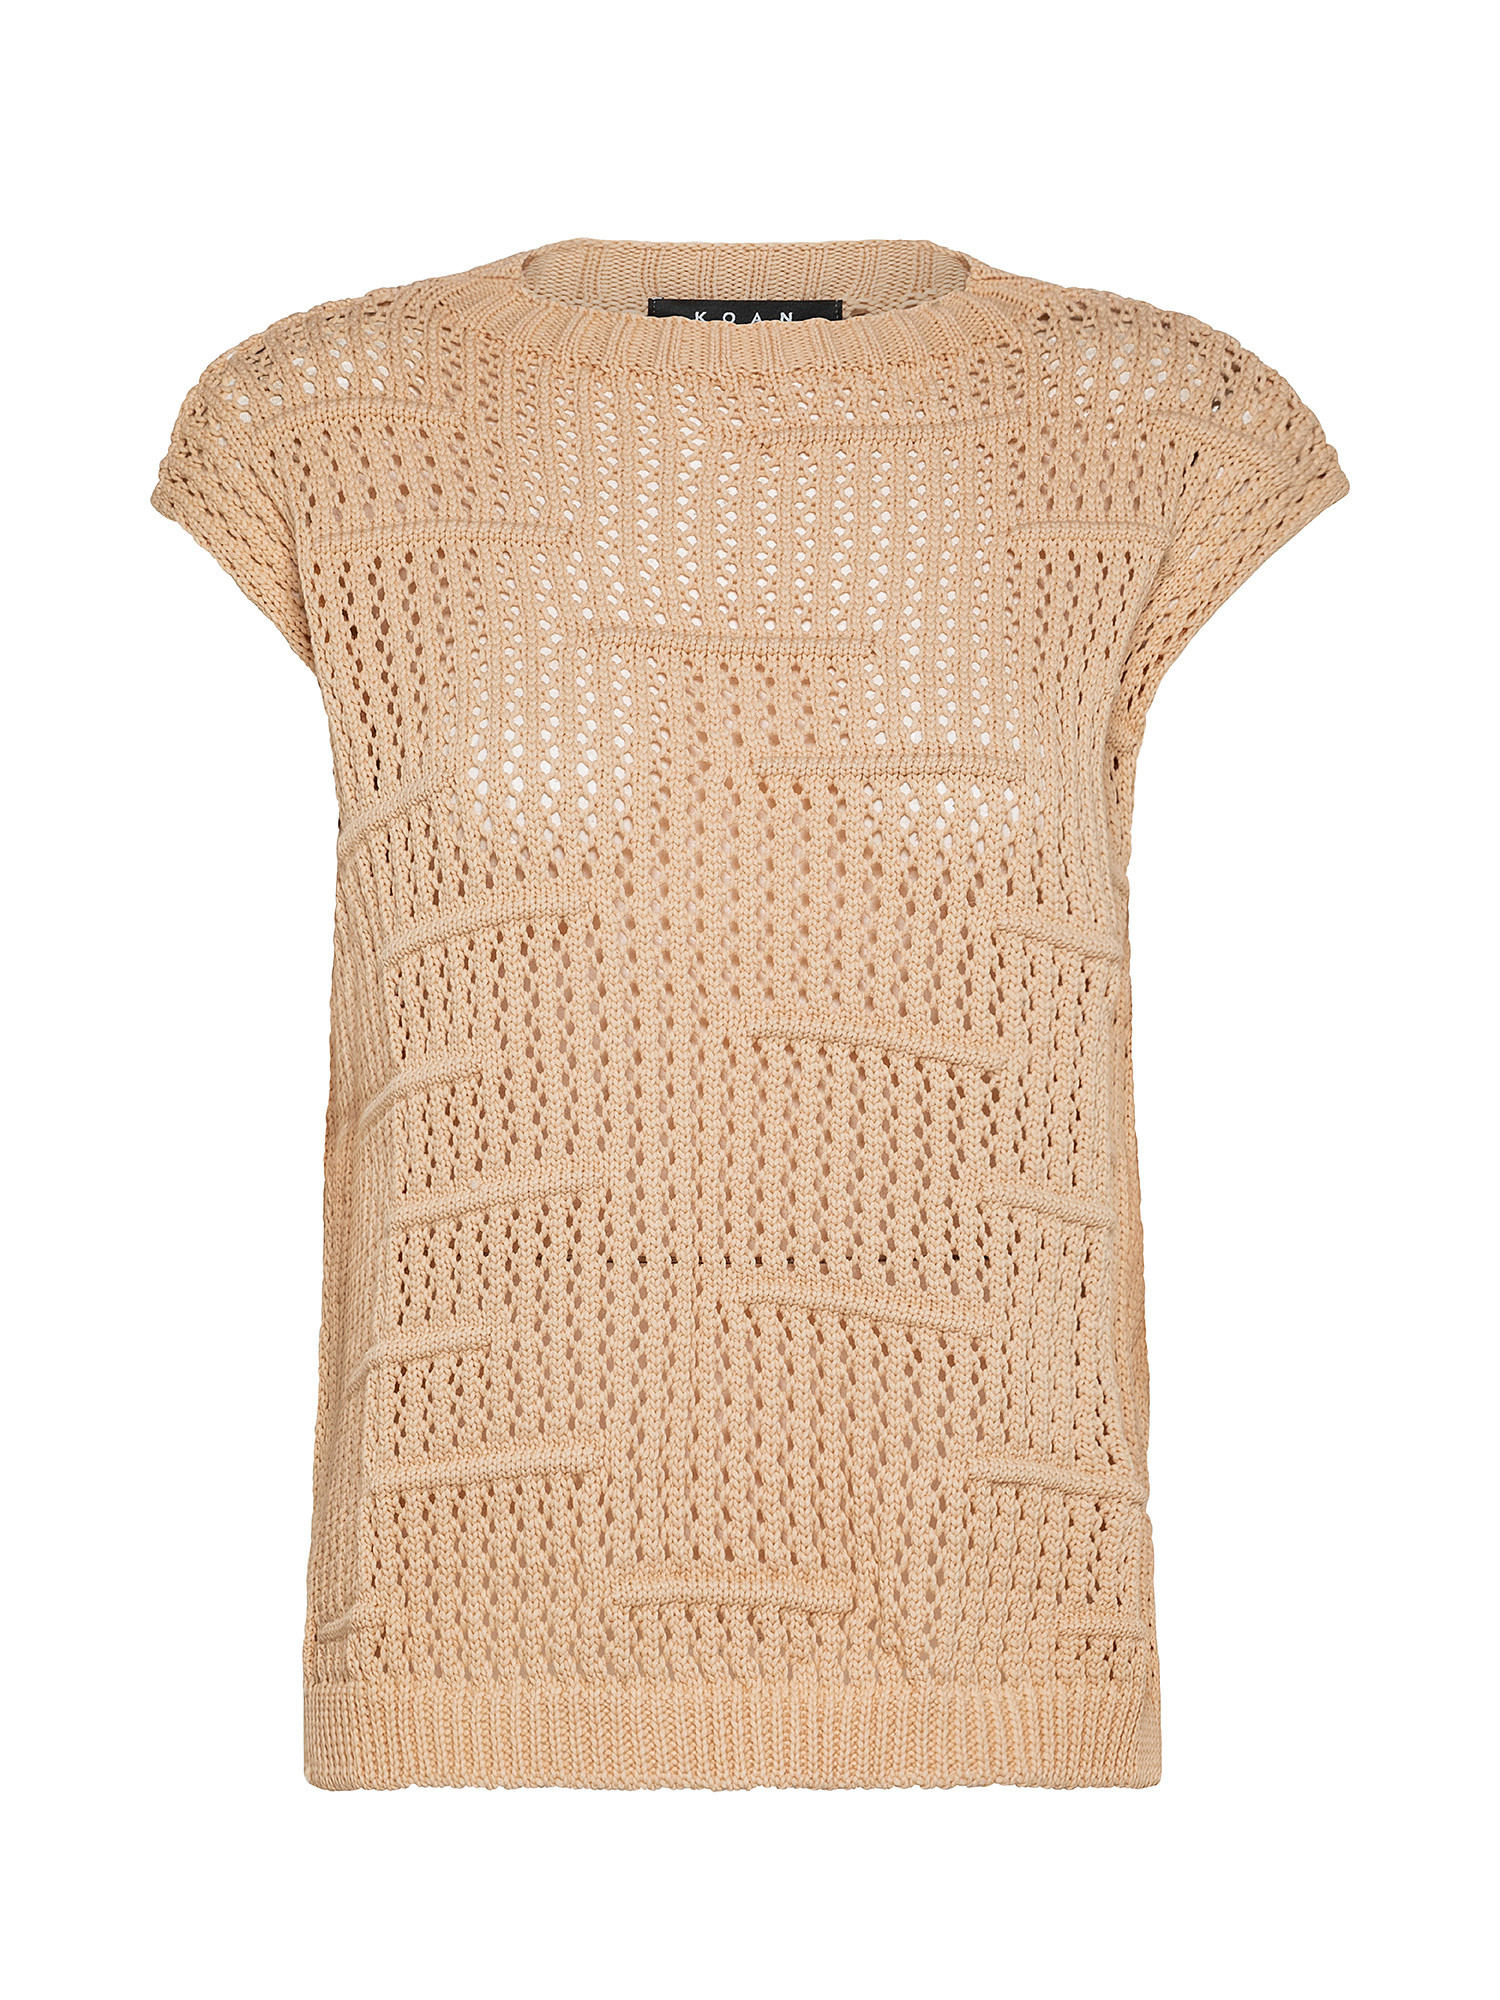 Maglia tricot, Beige, large image number 0